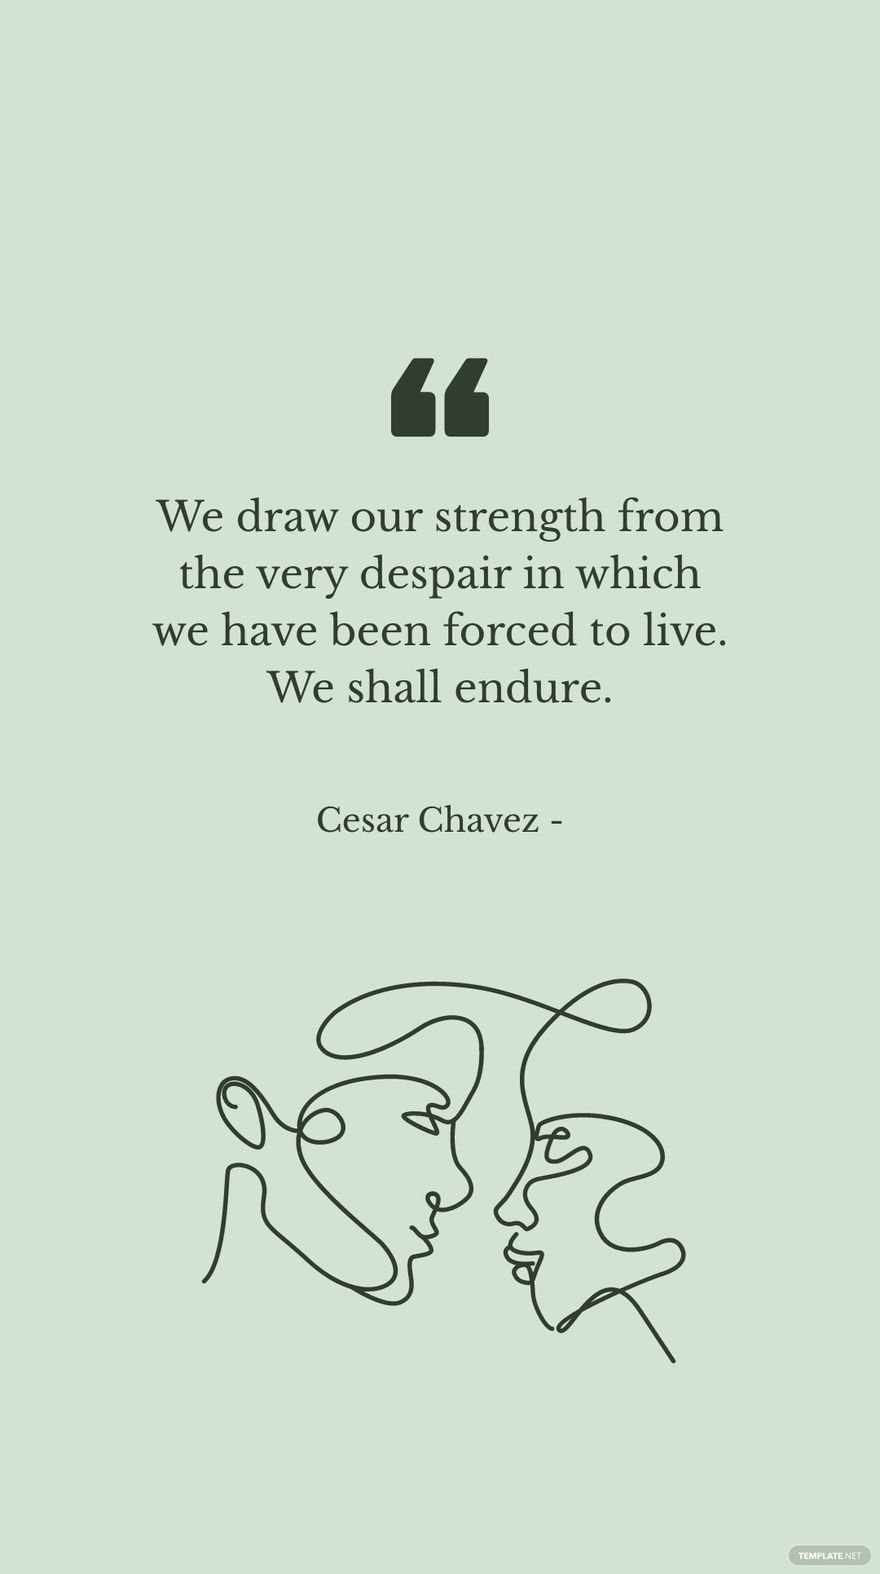 Cesar Chavez - We draw our strength from the very despair in which we have been forced to live. We shall endure.